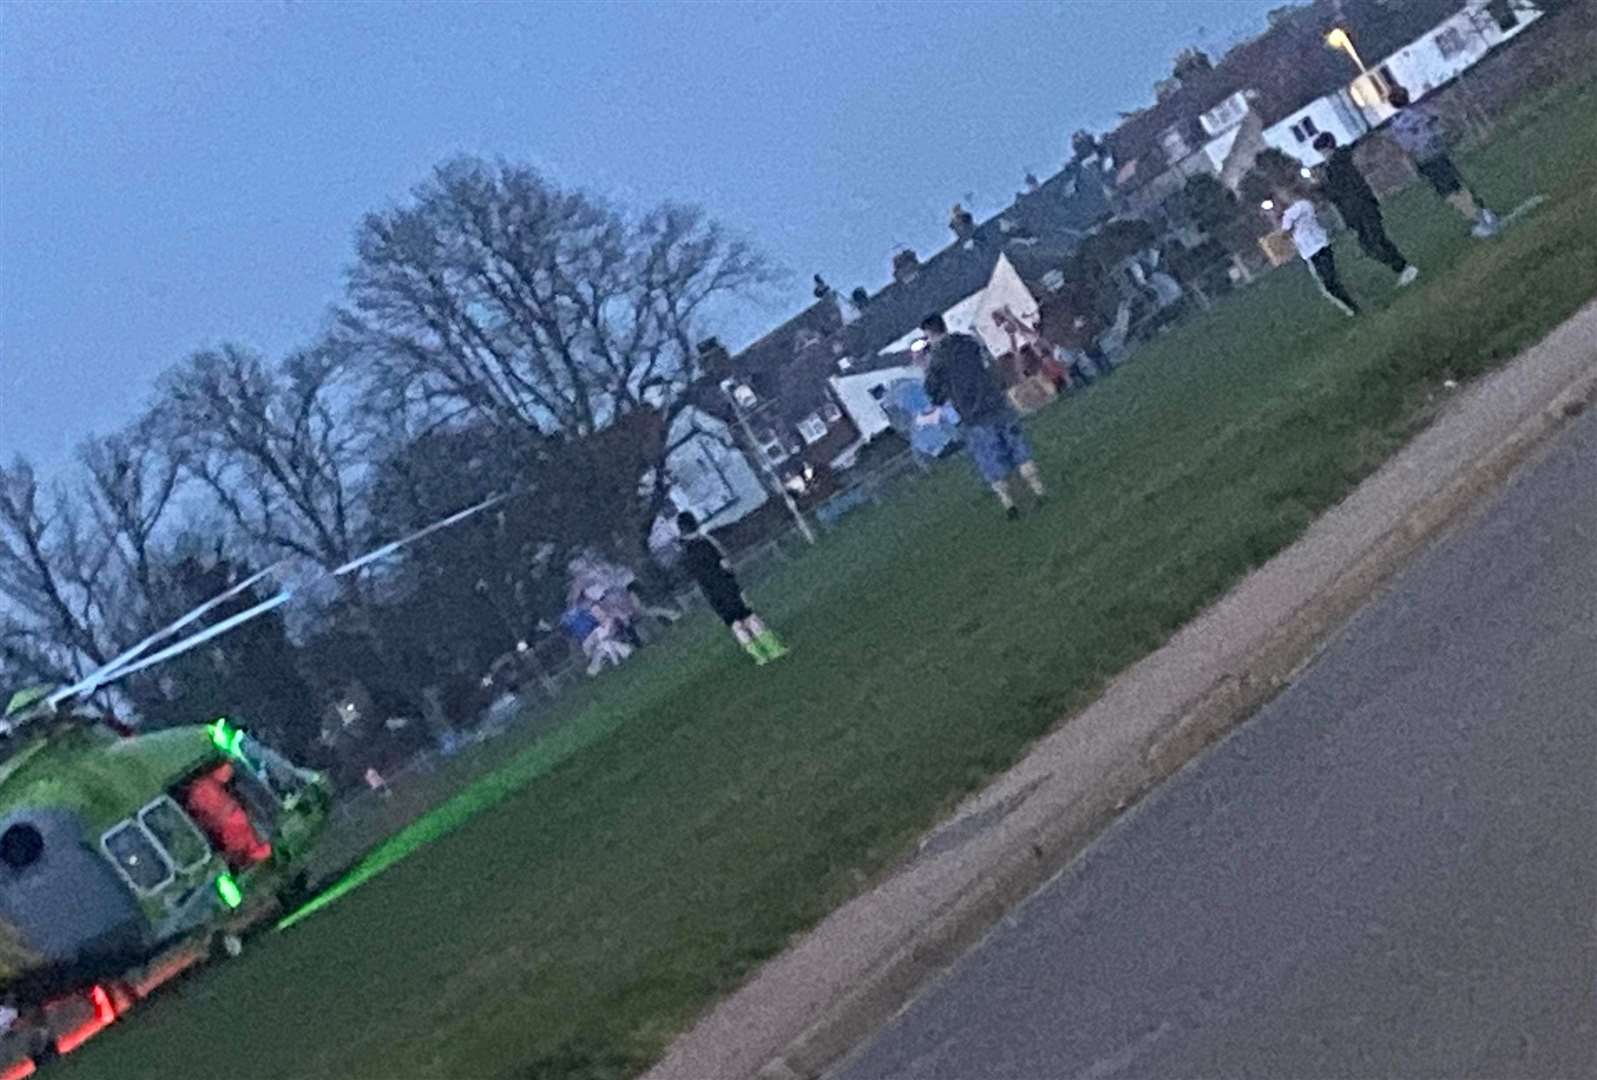 The air ambulance landed at Victoria Park in Deal